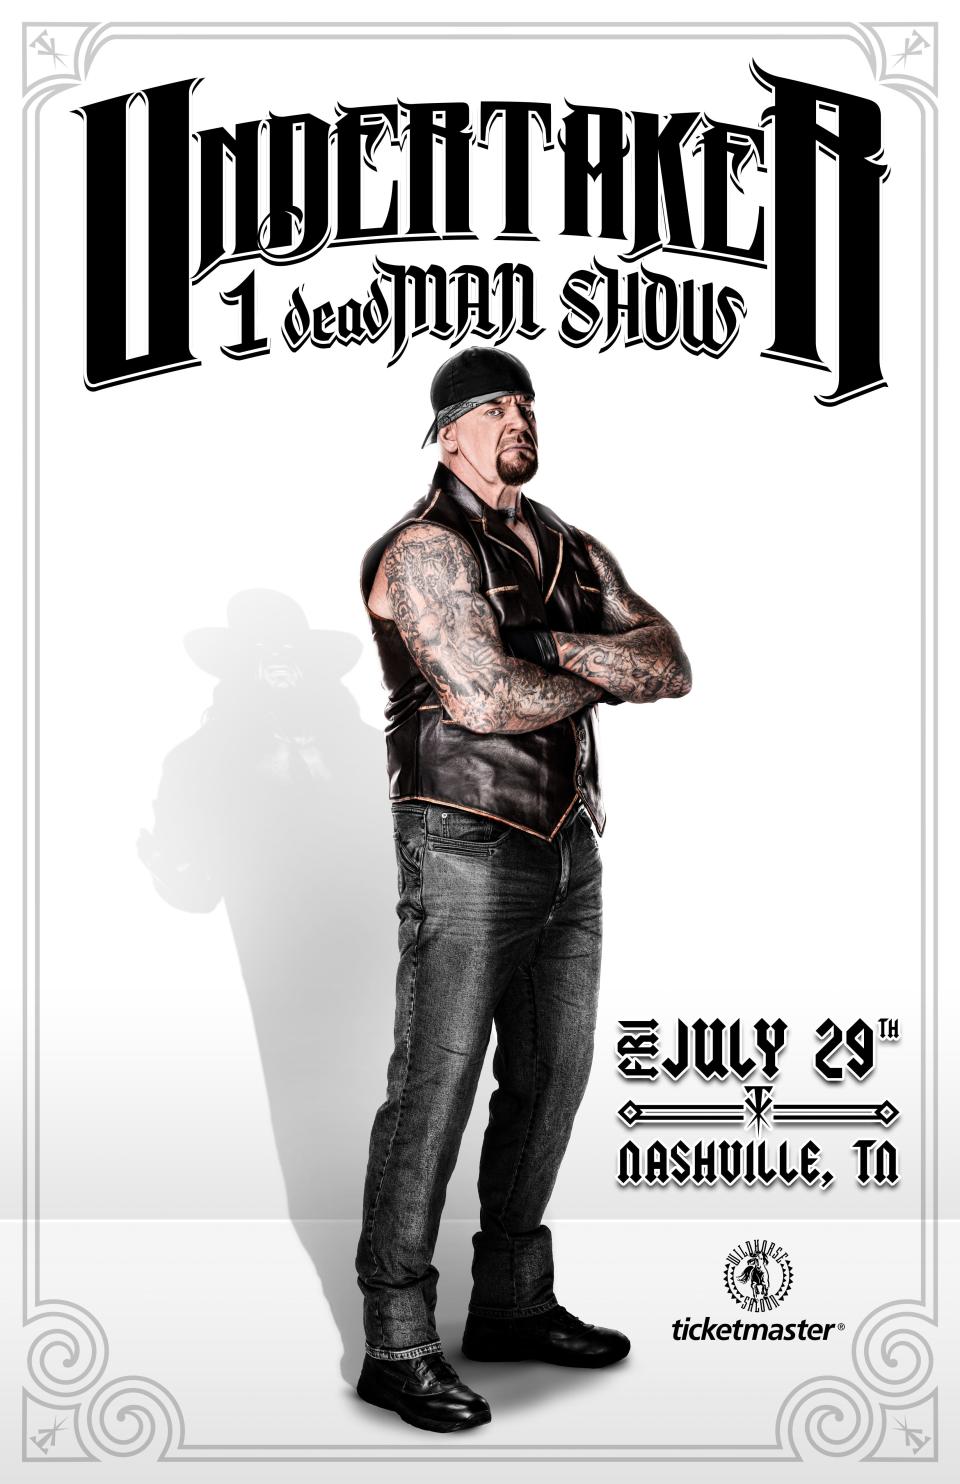 The seven-time world champion will debut his intimate, storytelling-driven, "UNDERTAKER 1 deadMAN SHOW" at Wildhorse Saloon.